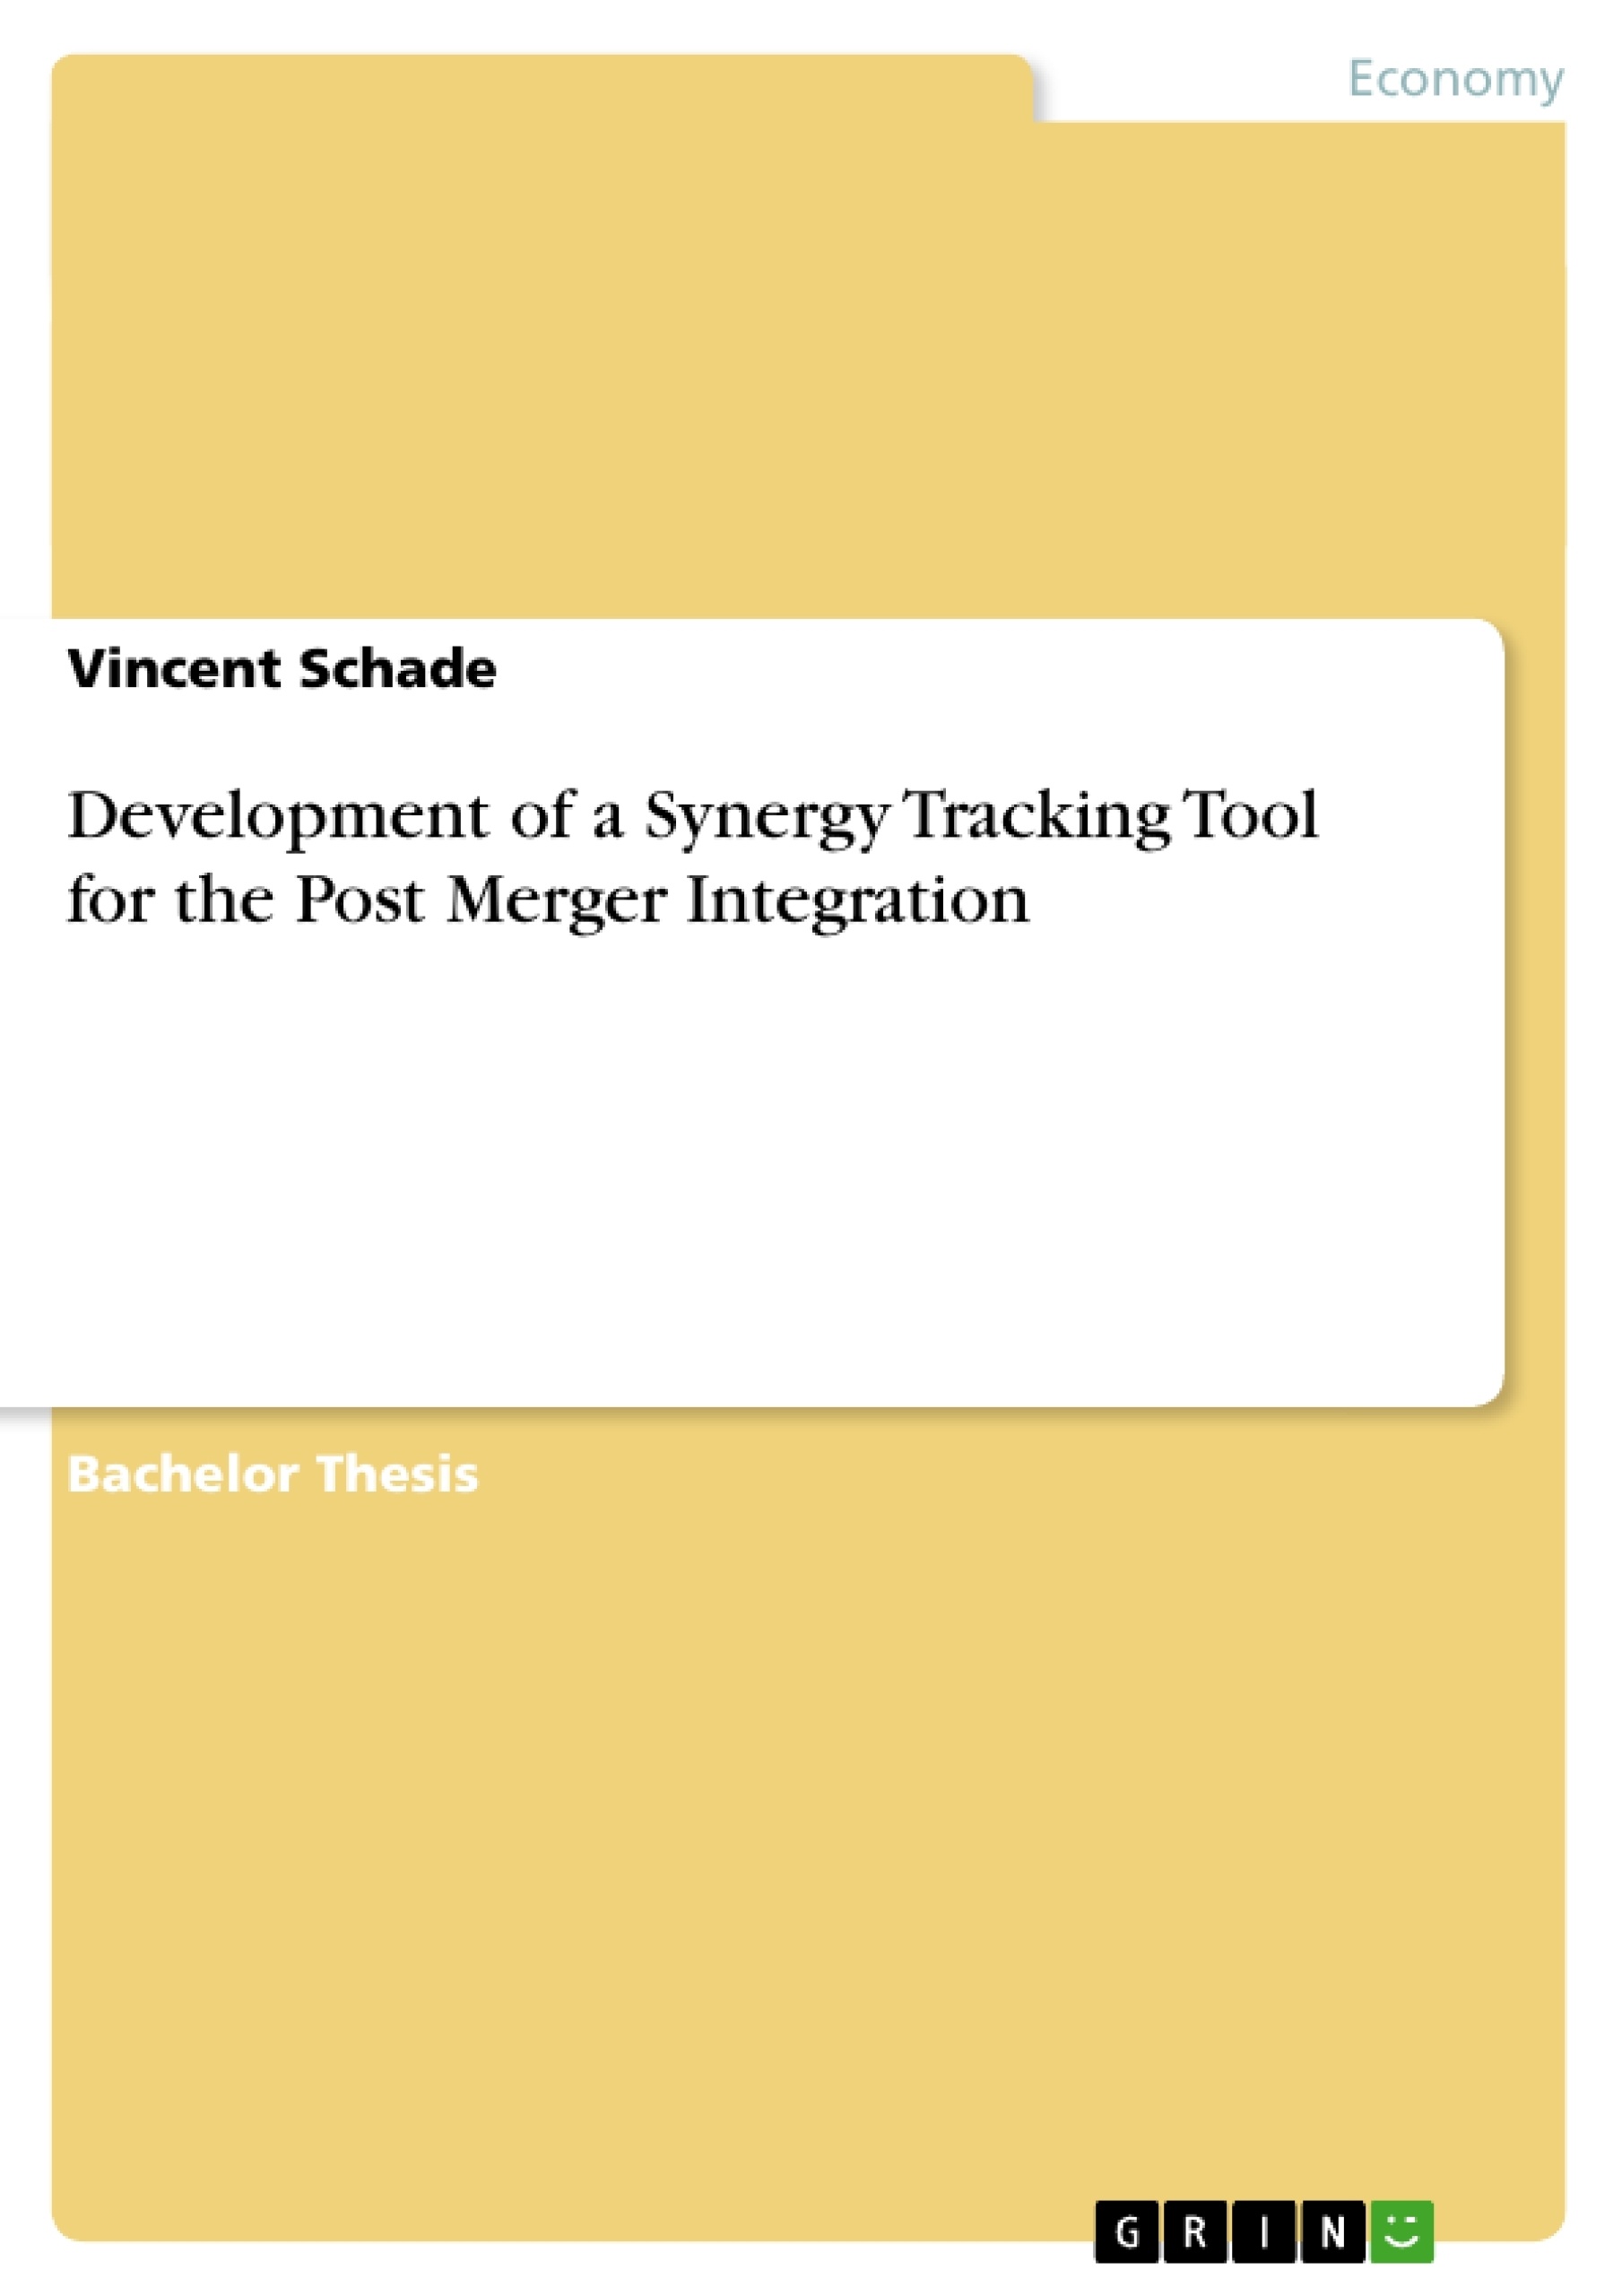 Title: Development of a Synergy Tracking Tool for the Post Merger Integration